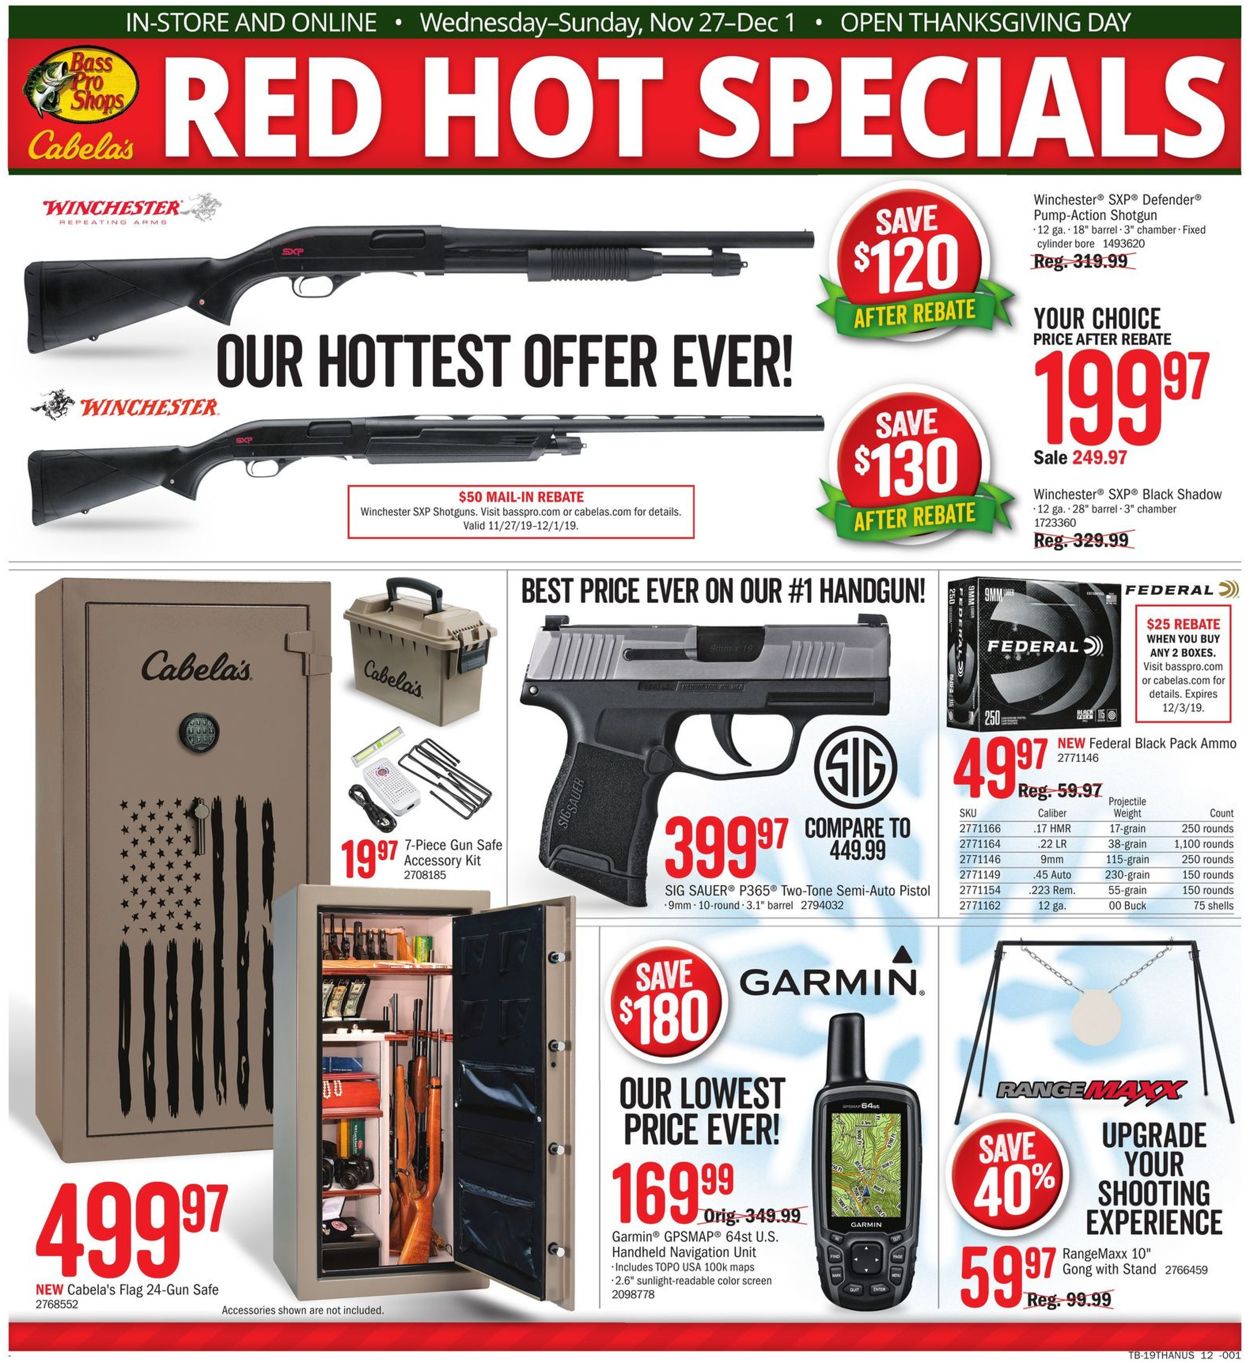 Cabela s Current Weekly Ad 11 27 12 01 2019 7 Frequent ads